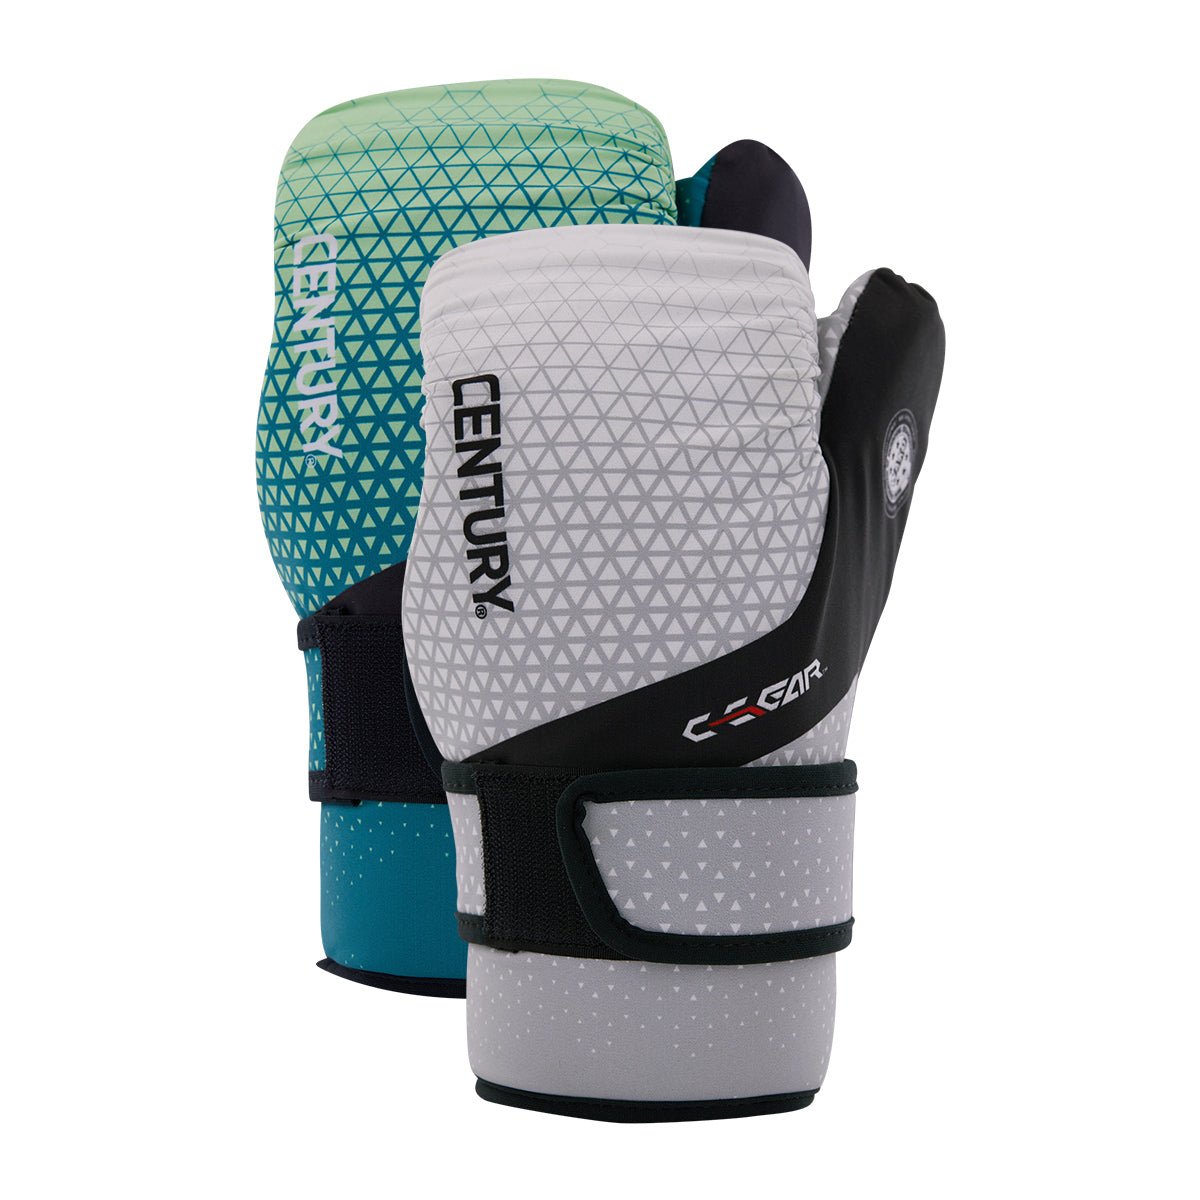 C-Gear Sport Discipline Point Fighting Punches